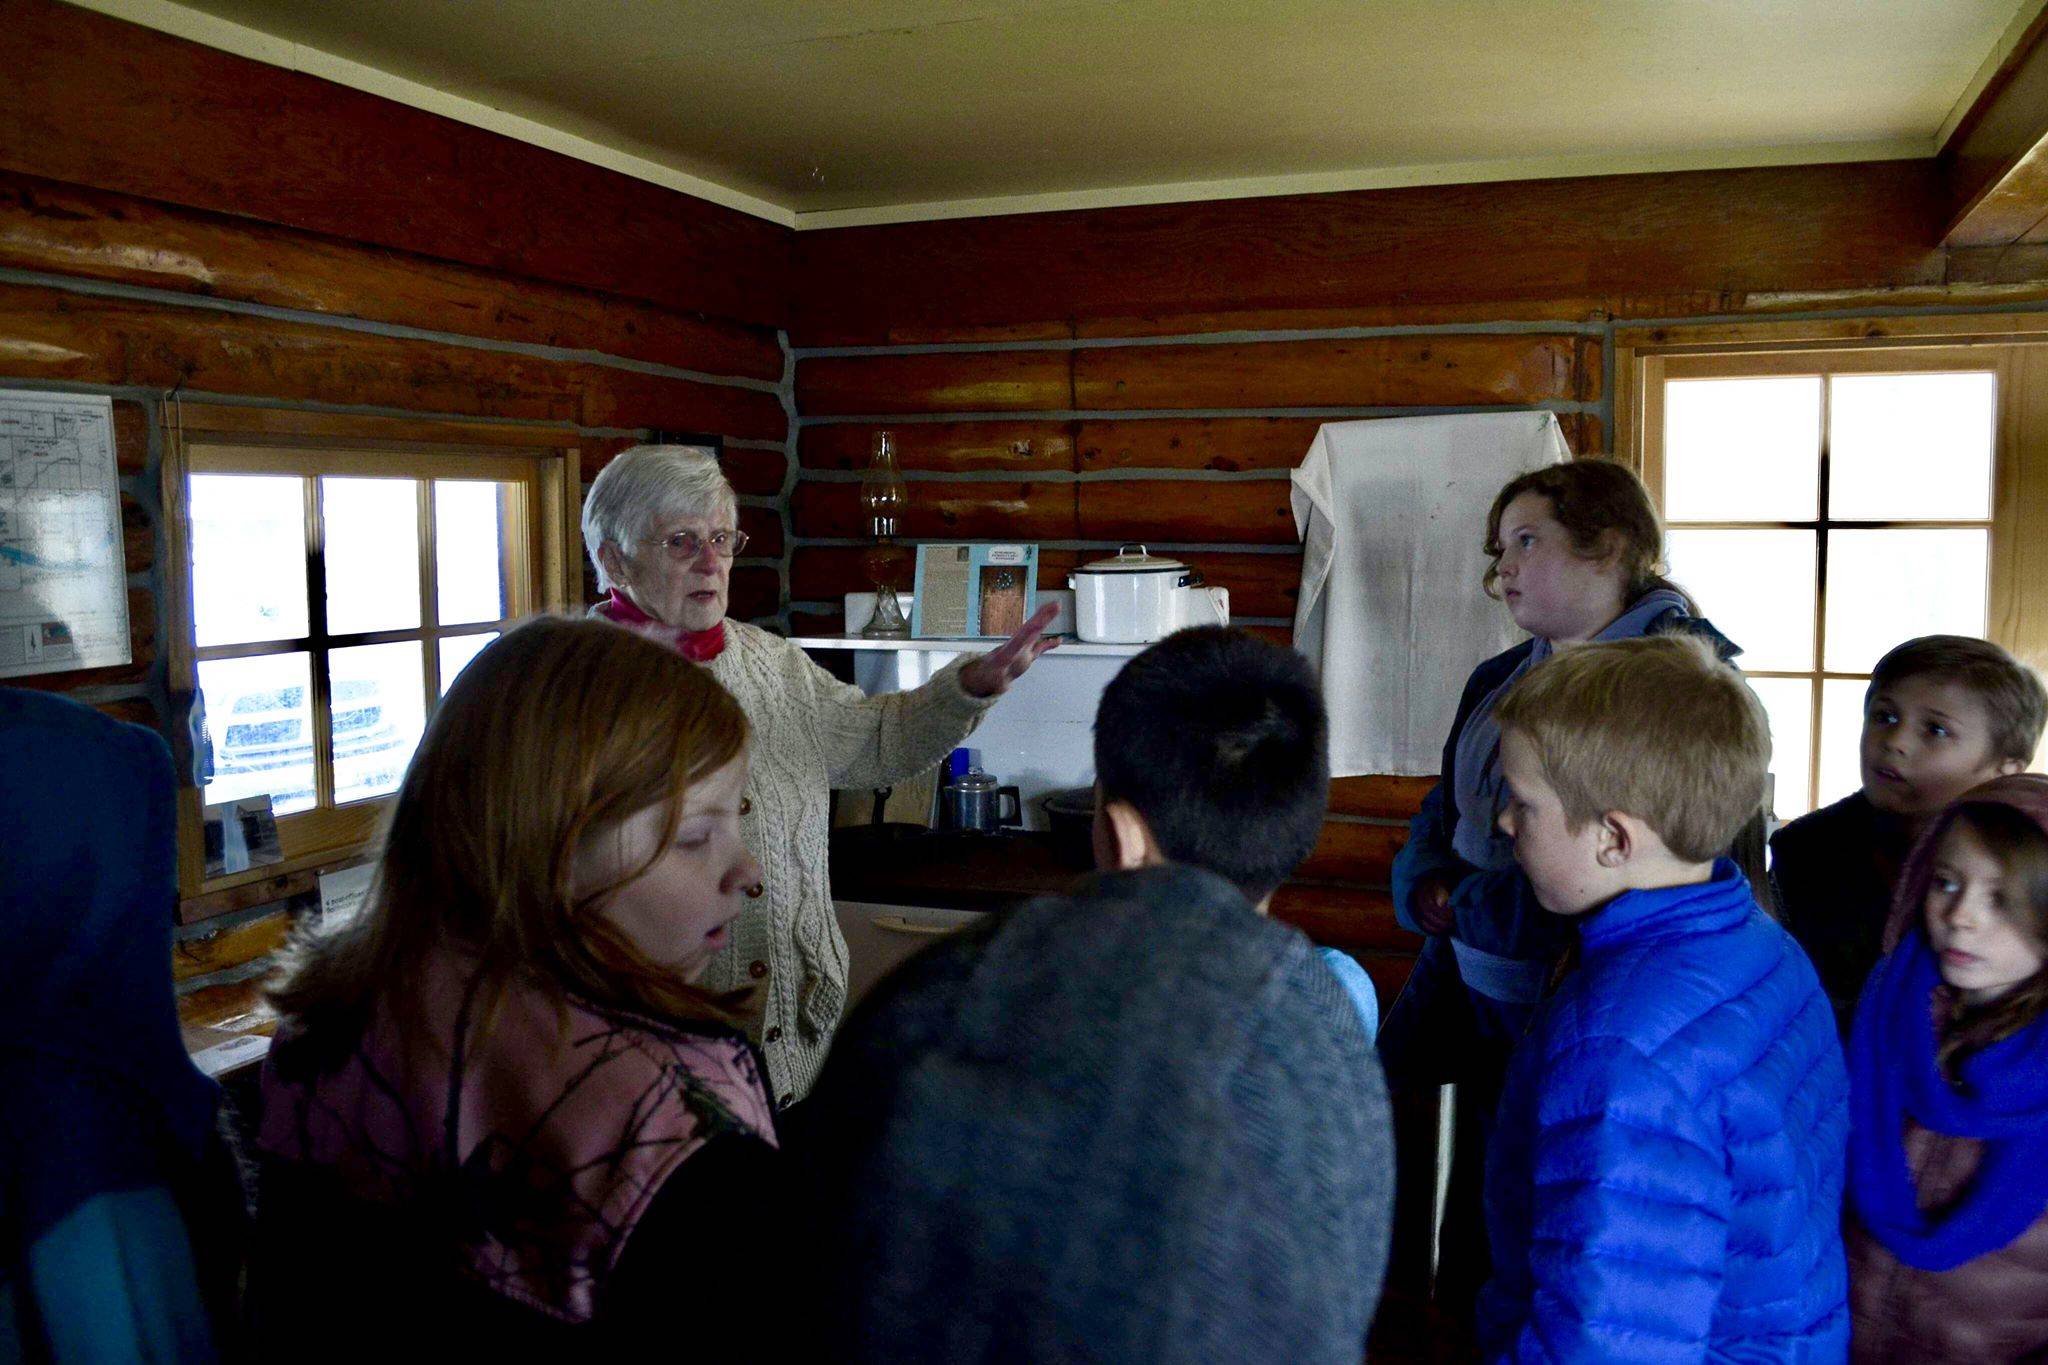 Marge Mullen shows a group of third graders around the Howard Lee Homestead, which was used as the city’s first post office when she first homesteaded in Soldotna, on Wednesday, Oct. 17, 2018, in Soldotna, AK. (Photo by Victoria Petersen/Peninsula Clarion)